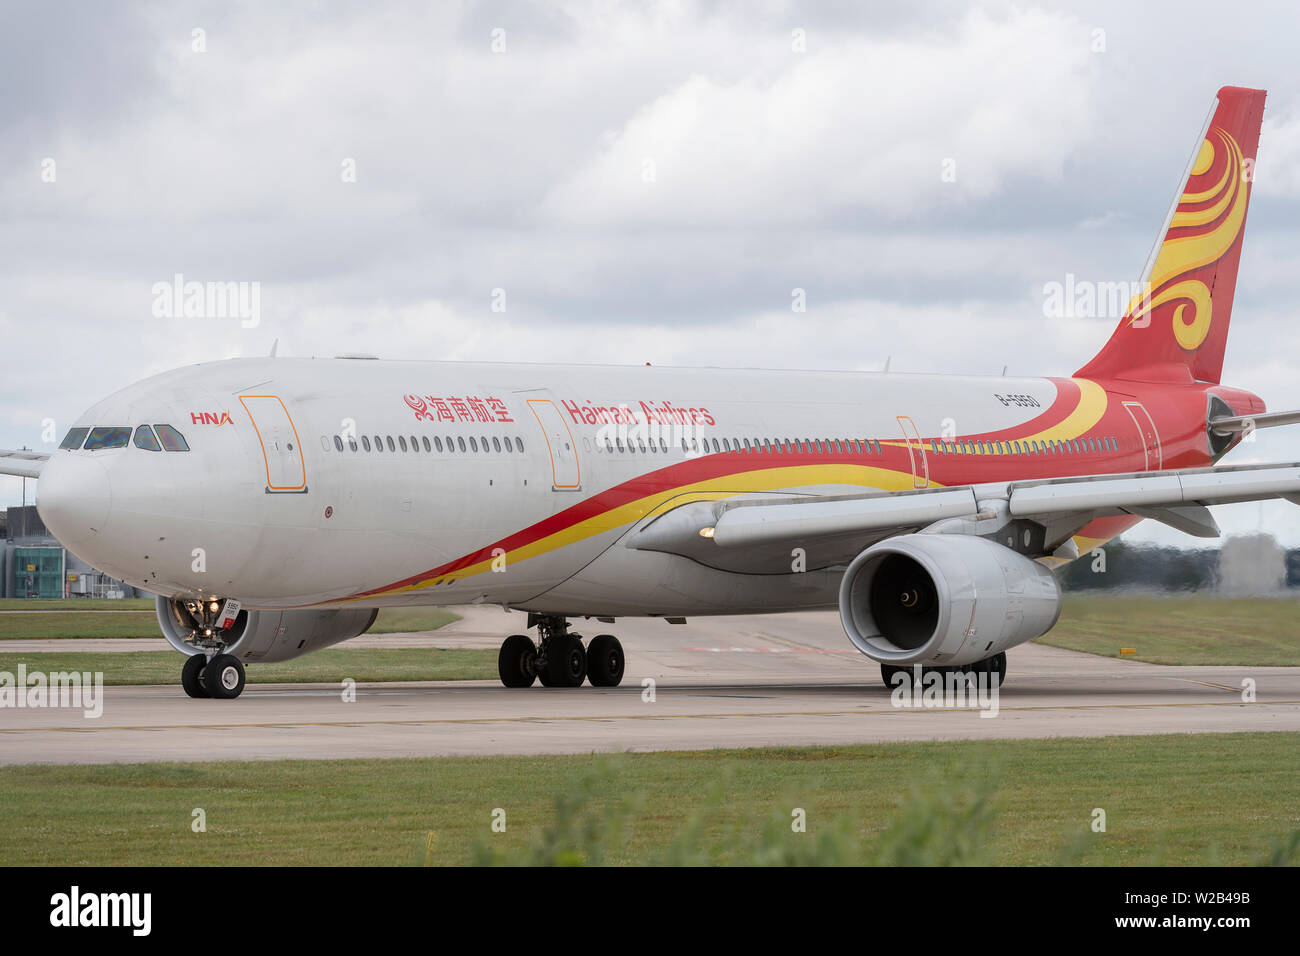 A Hainan Airlines Airbus A330-300 taxis on the runway at Manchester Airport, UK. Stock Photo